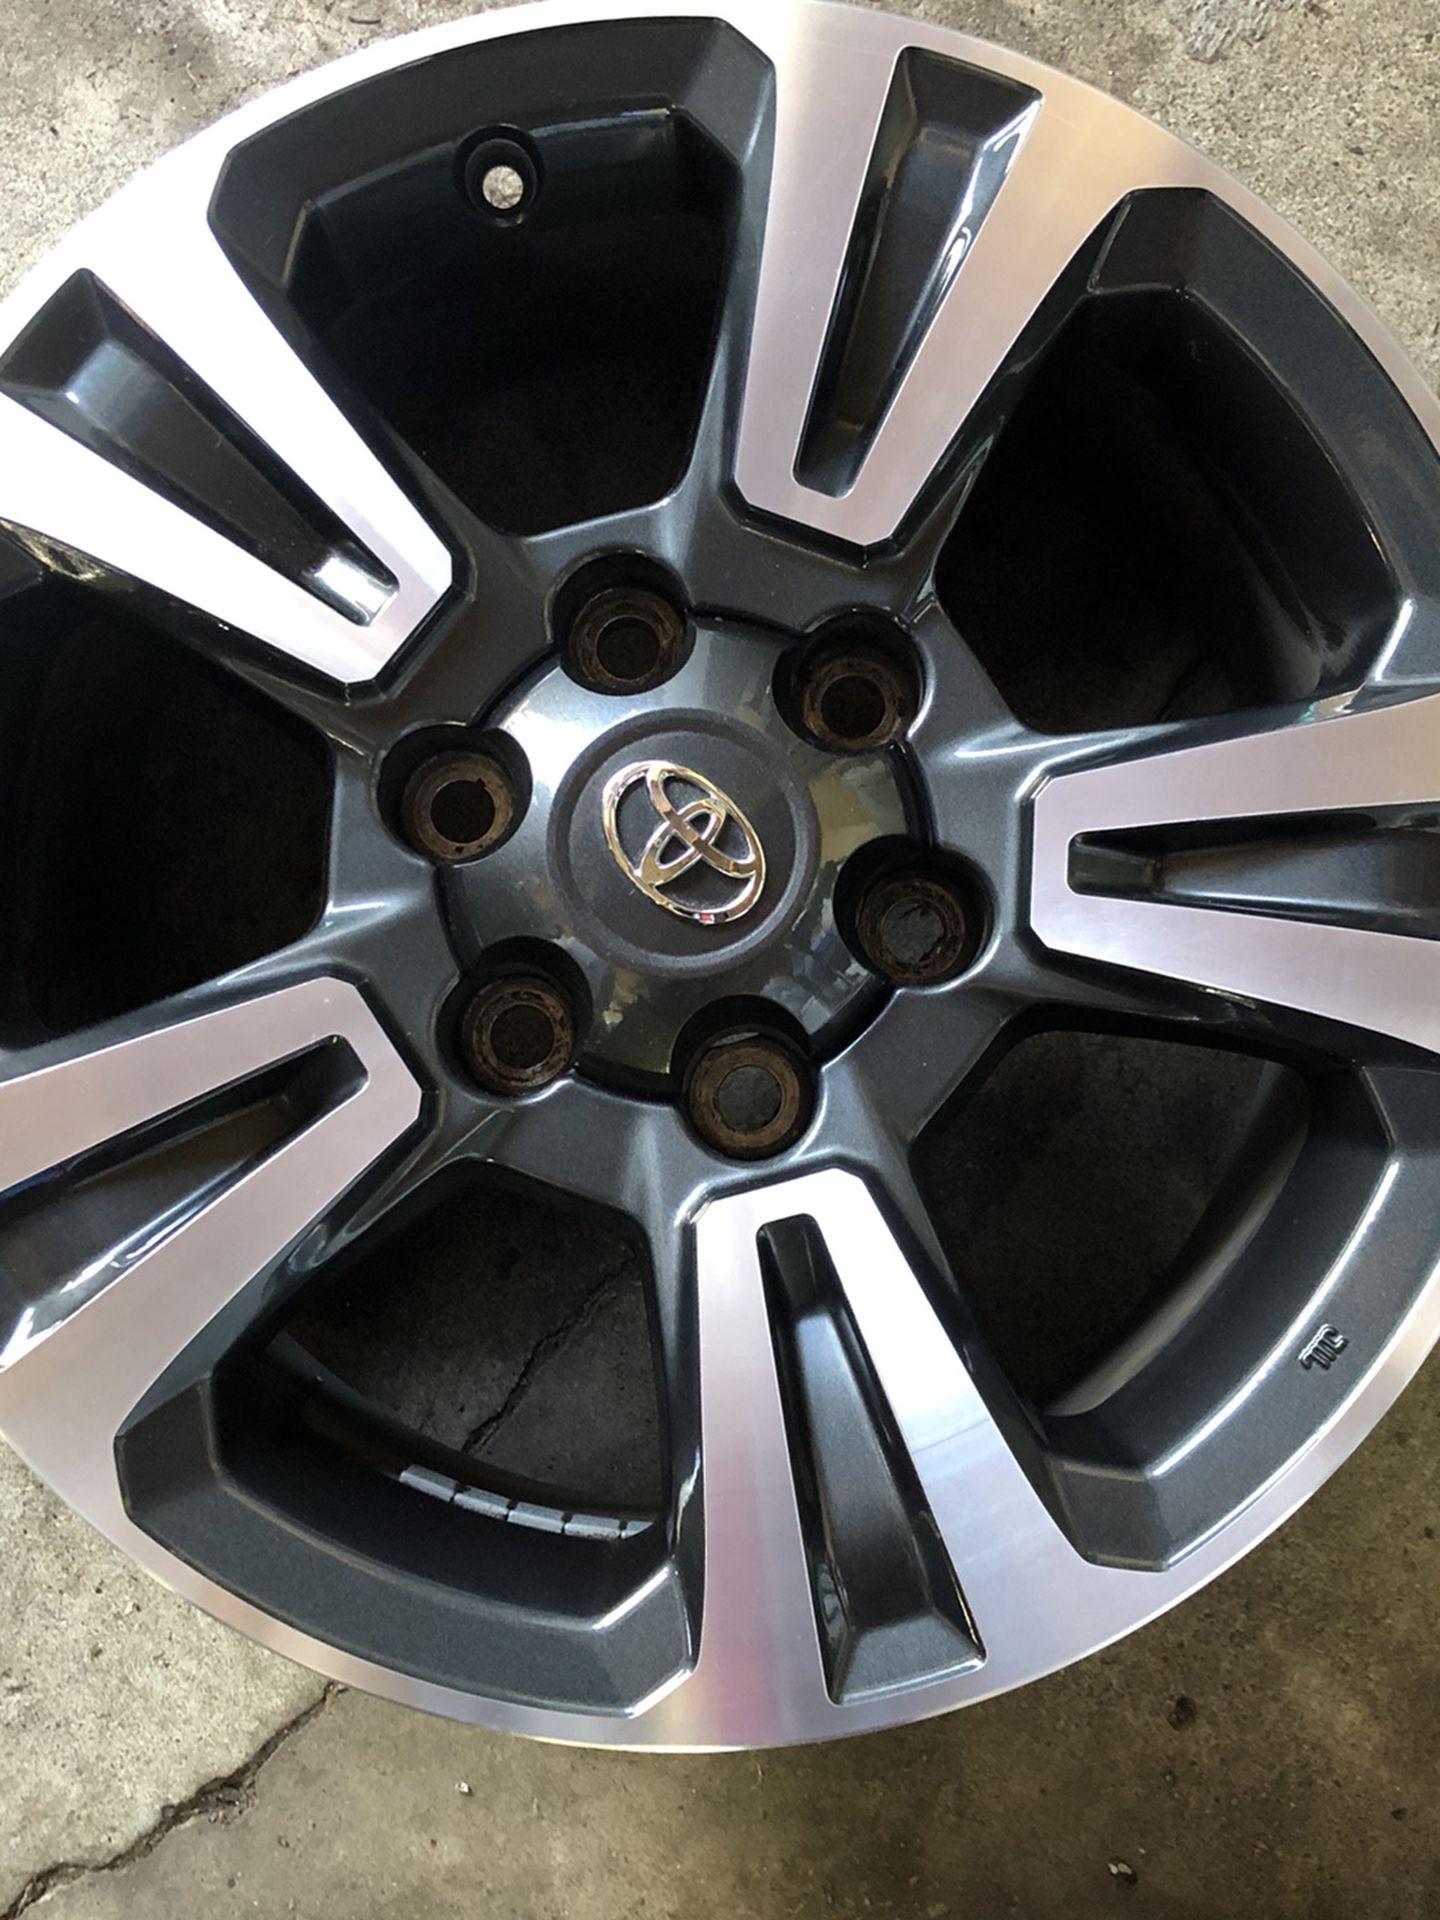 4 RIMS TOYOTA SIZE 17 TRD STOCK THEY FIT TACOMA SEQUOIA AND 4RUNNER  6 LUGS  GREAT CONDITION  9/10 